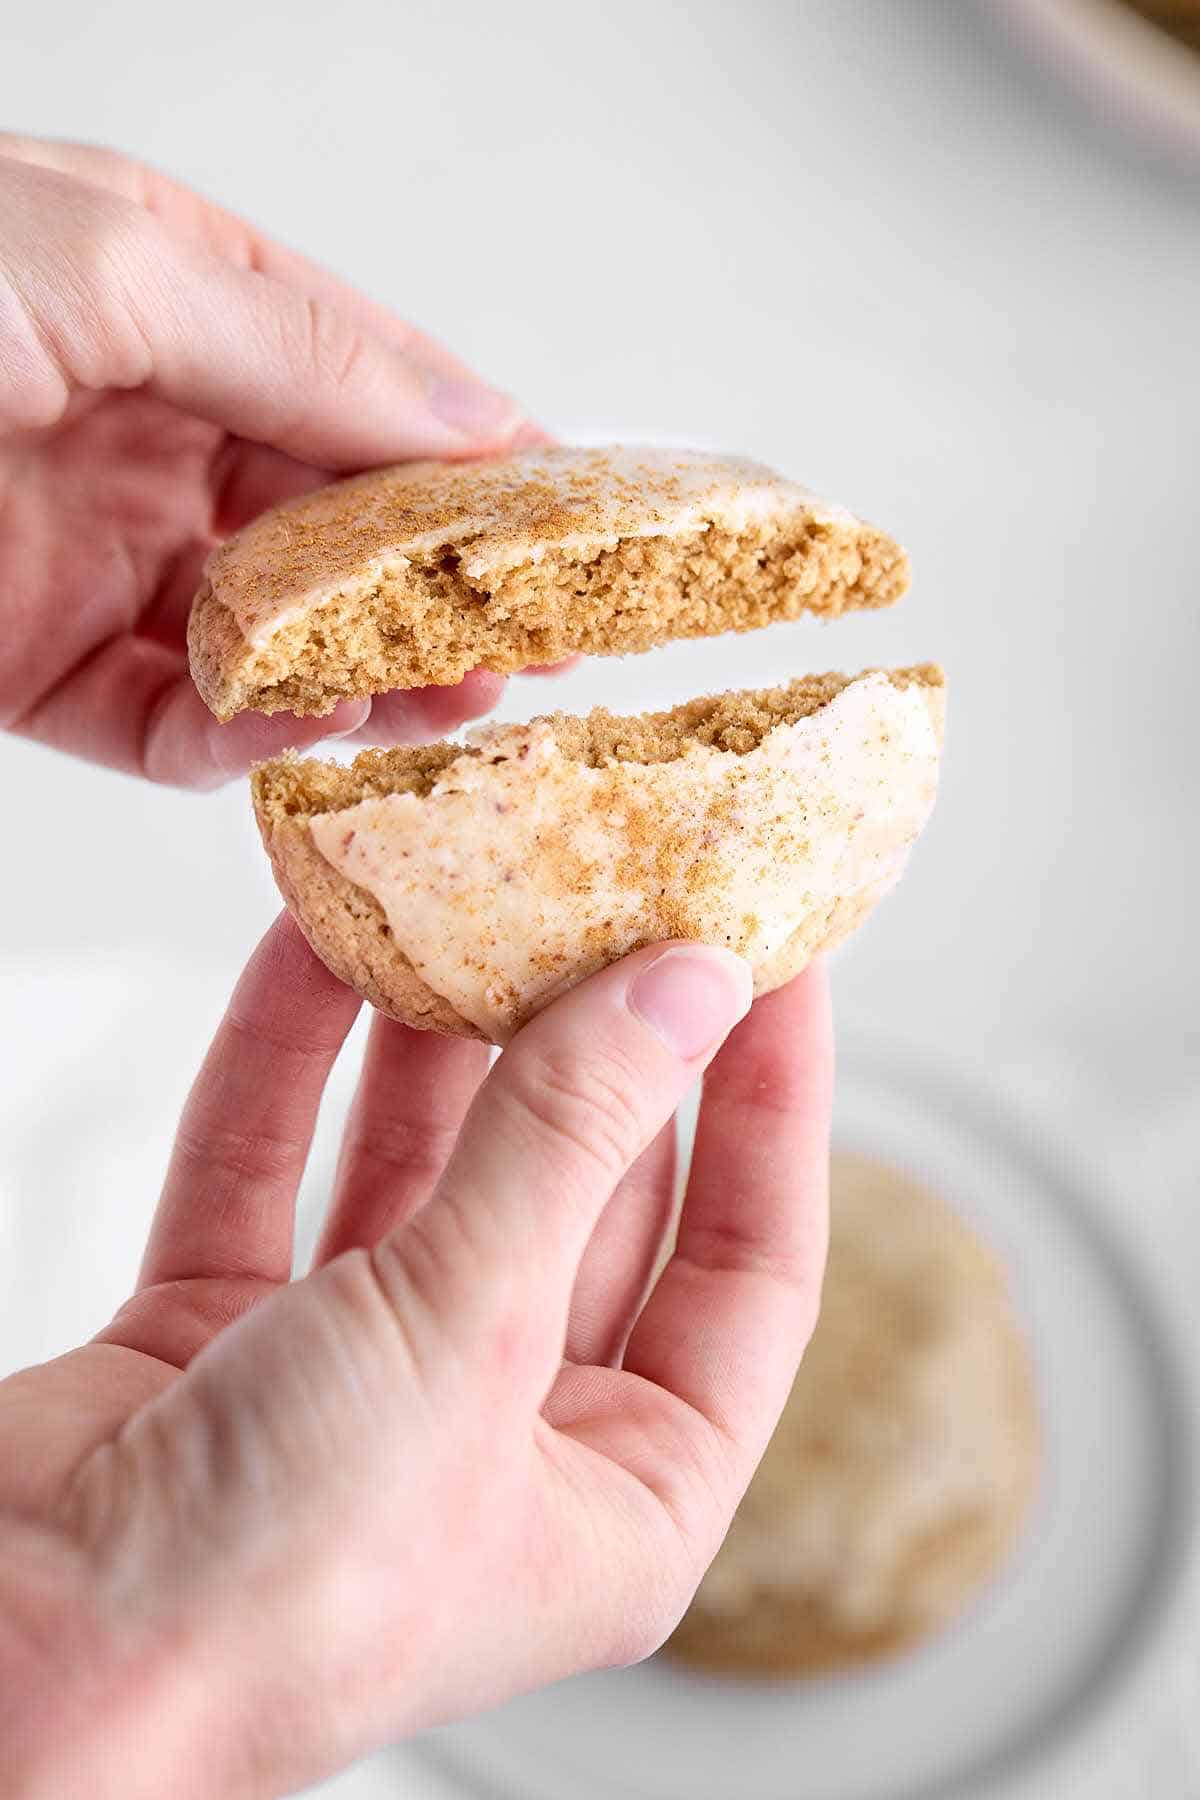 Fingers breaking a spice cookie in half to show the inside.